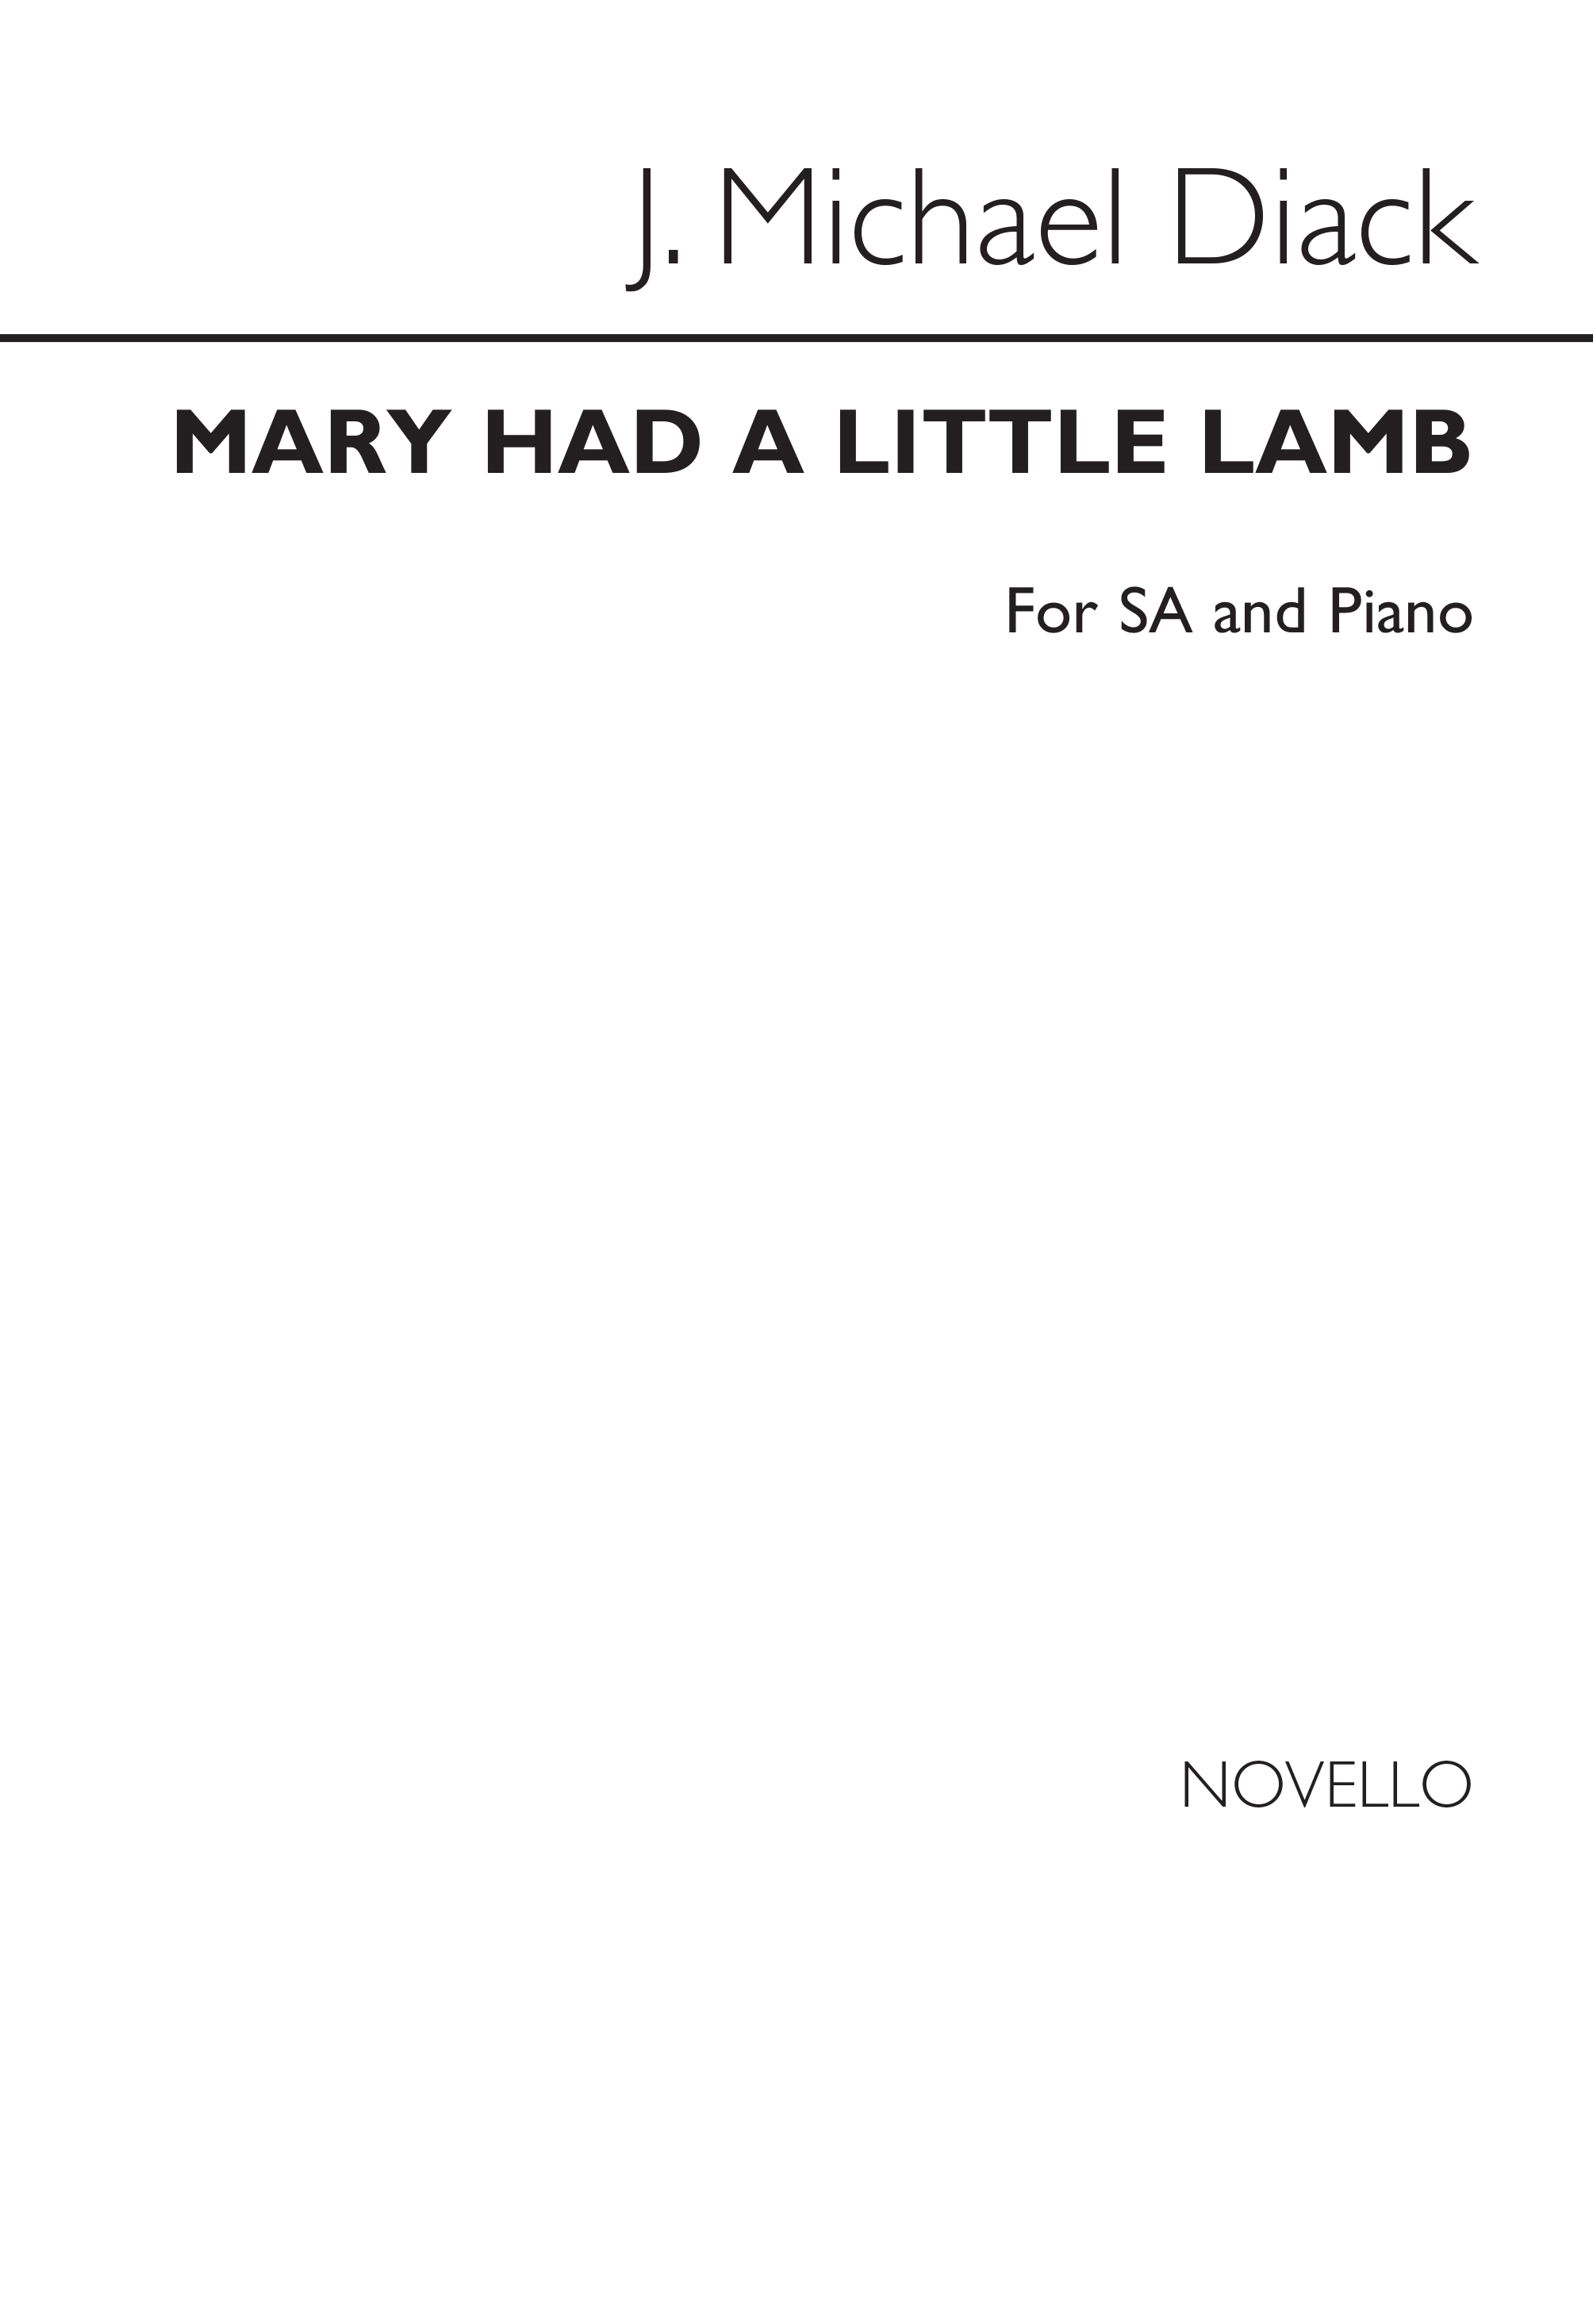 Mary Had A Little Lamb: Upper Voices: Vocal Score